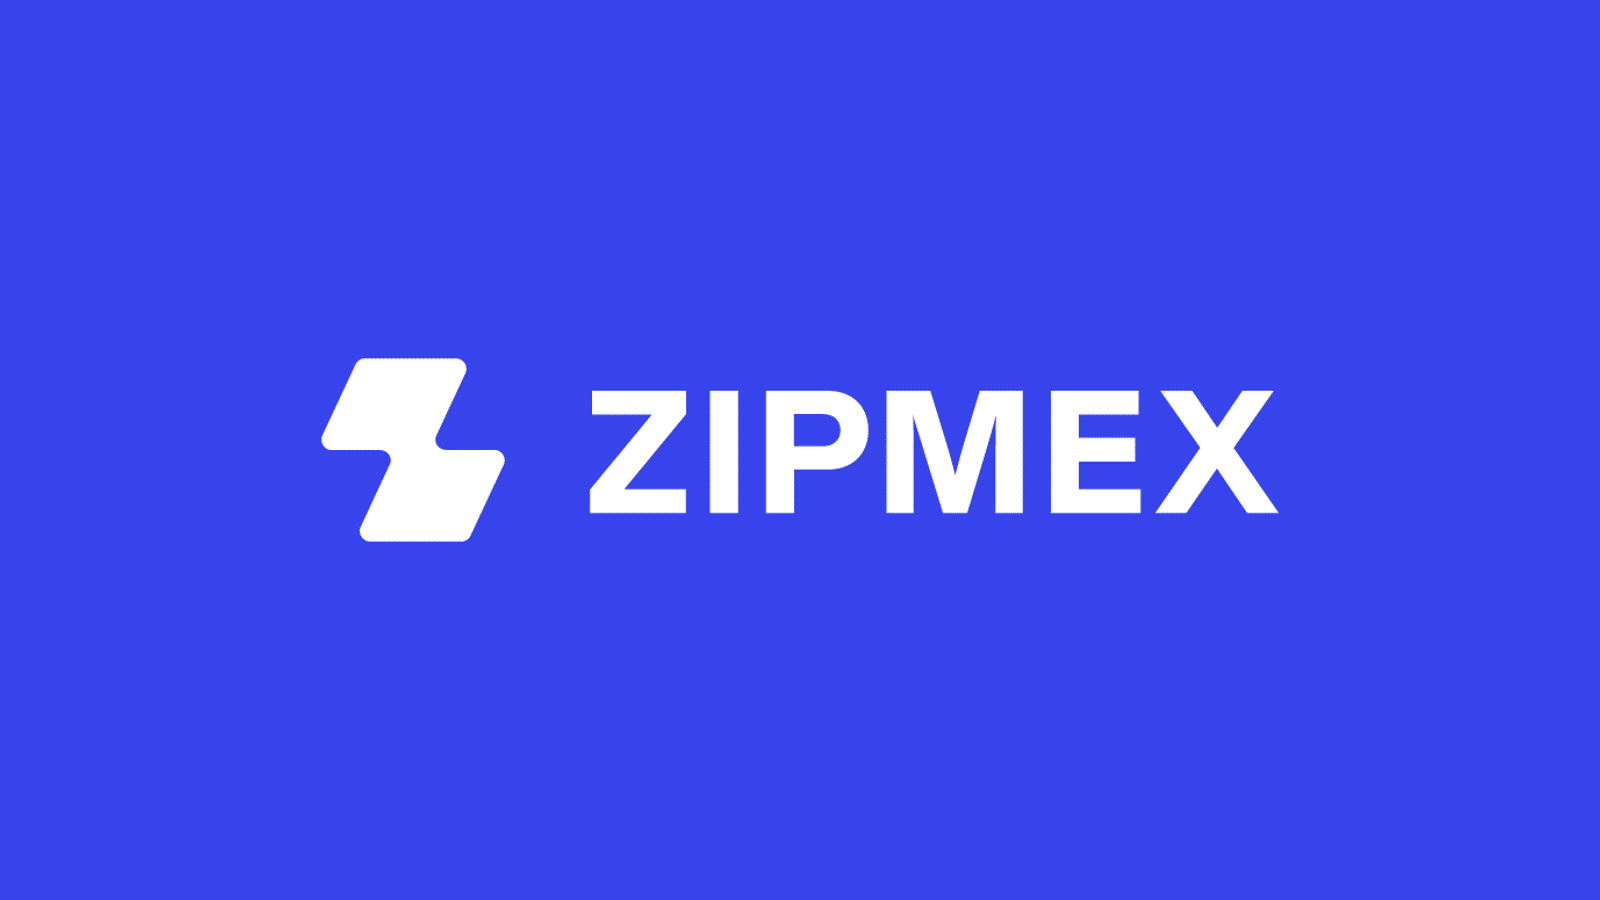 Zipmex Proposes Repayment of 3.35 Cents Per Dollar to Creditors in Latest Restructuring Plan